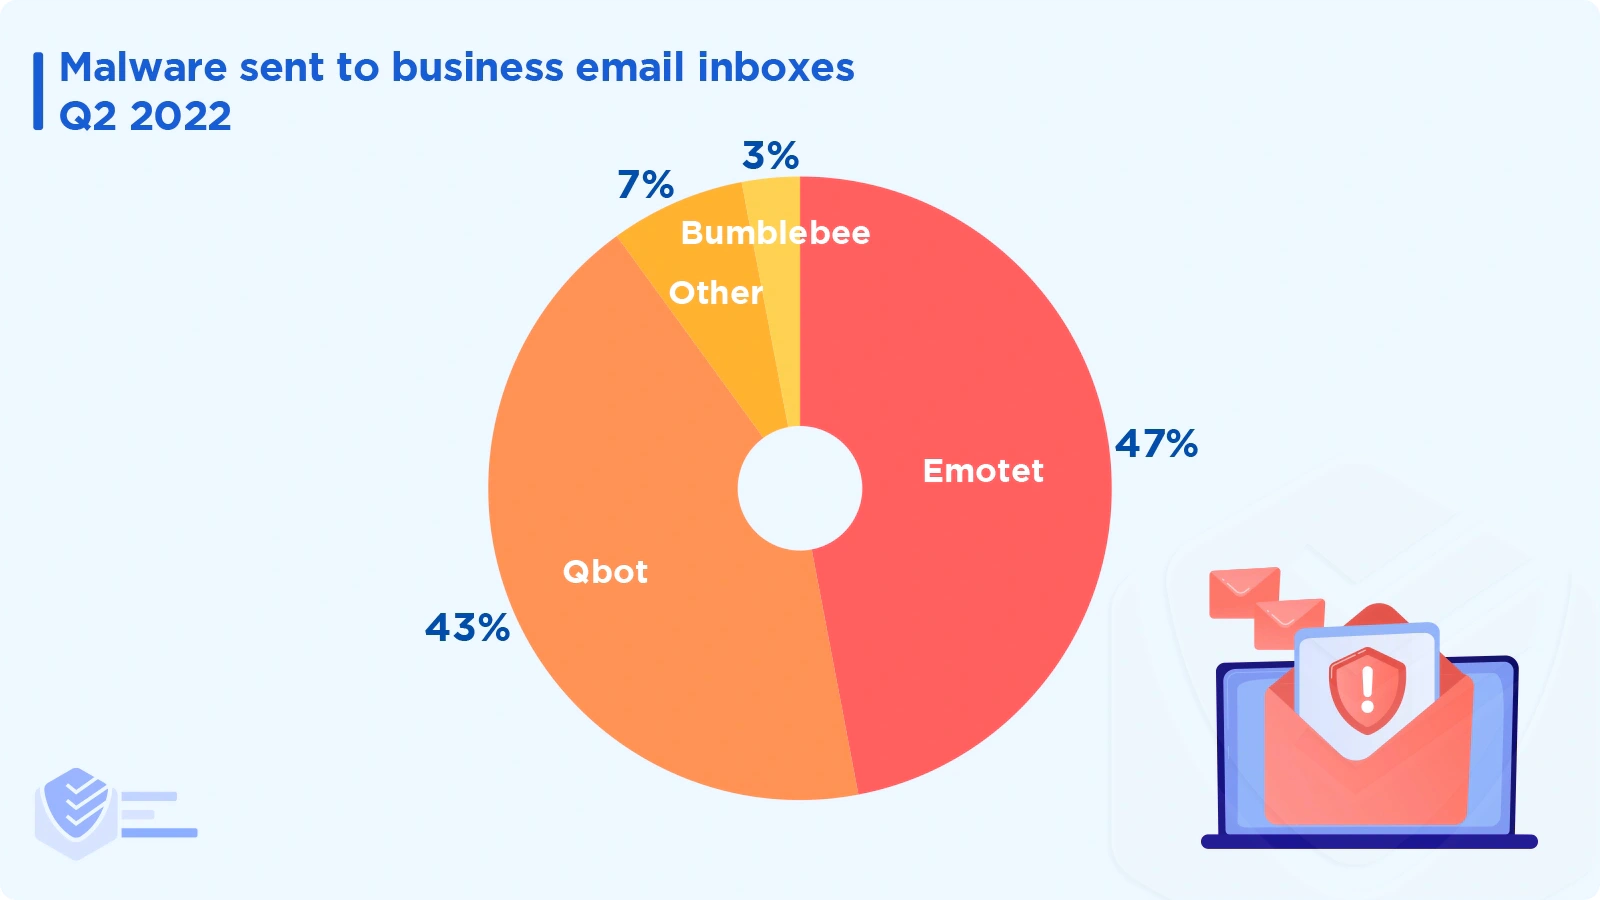 Malware sent to business email inboxes Q2 2022